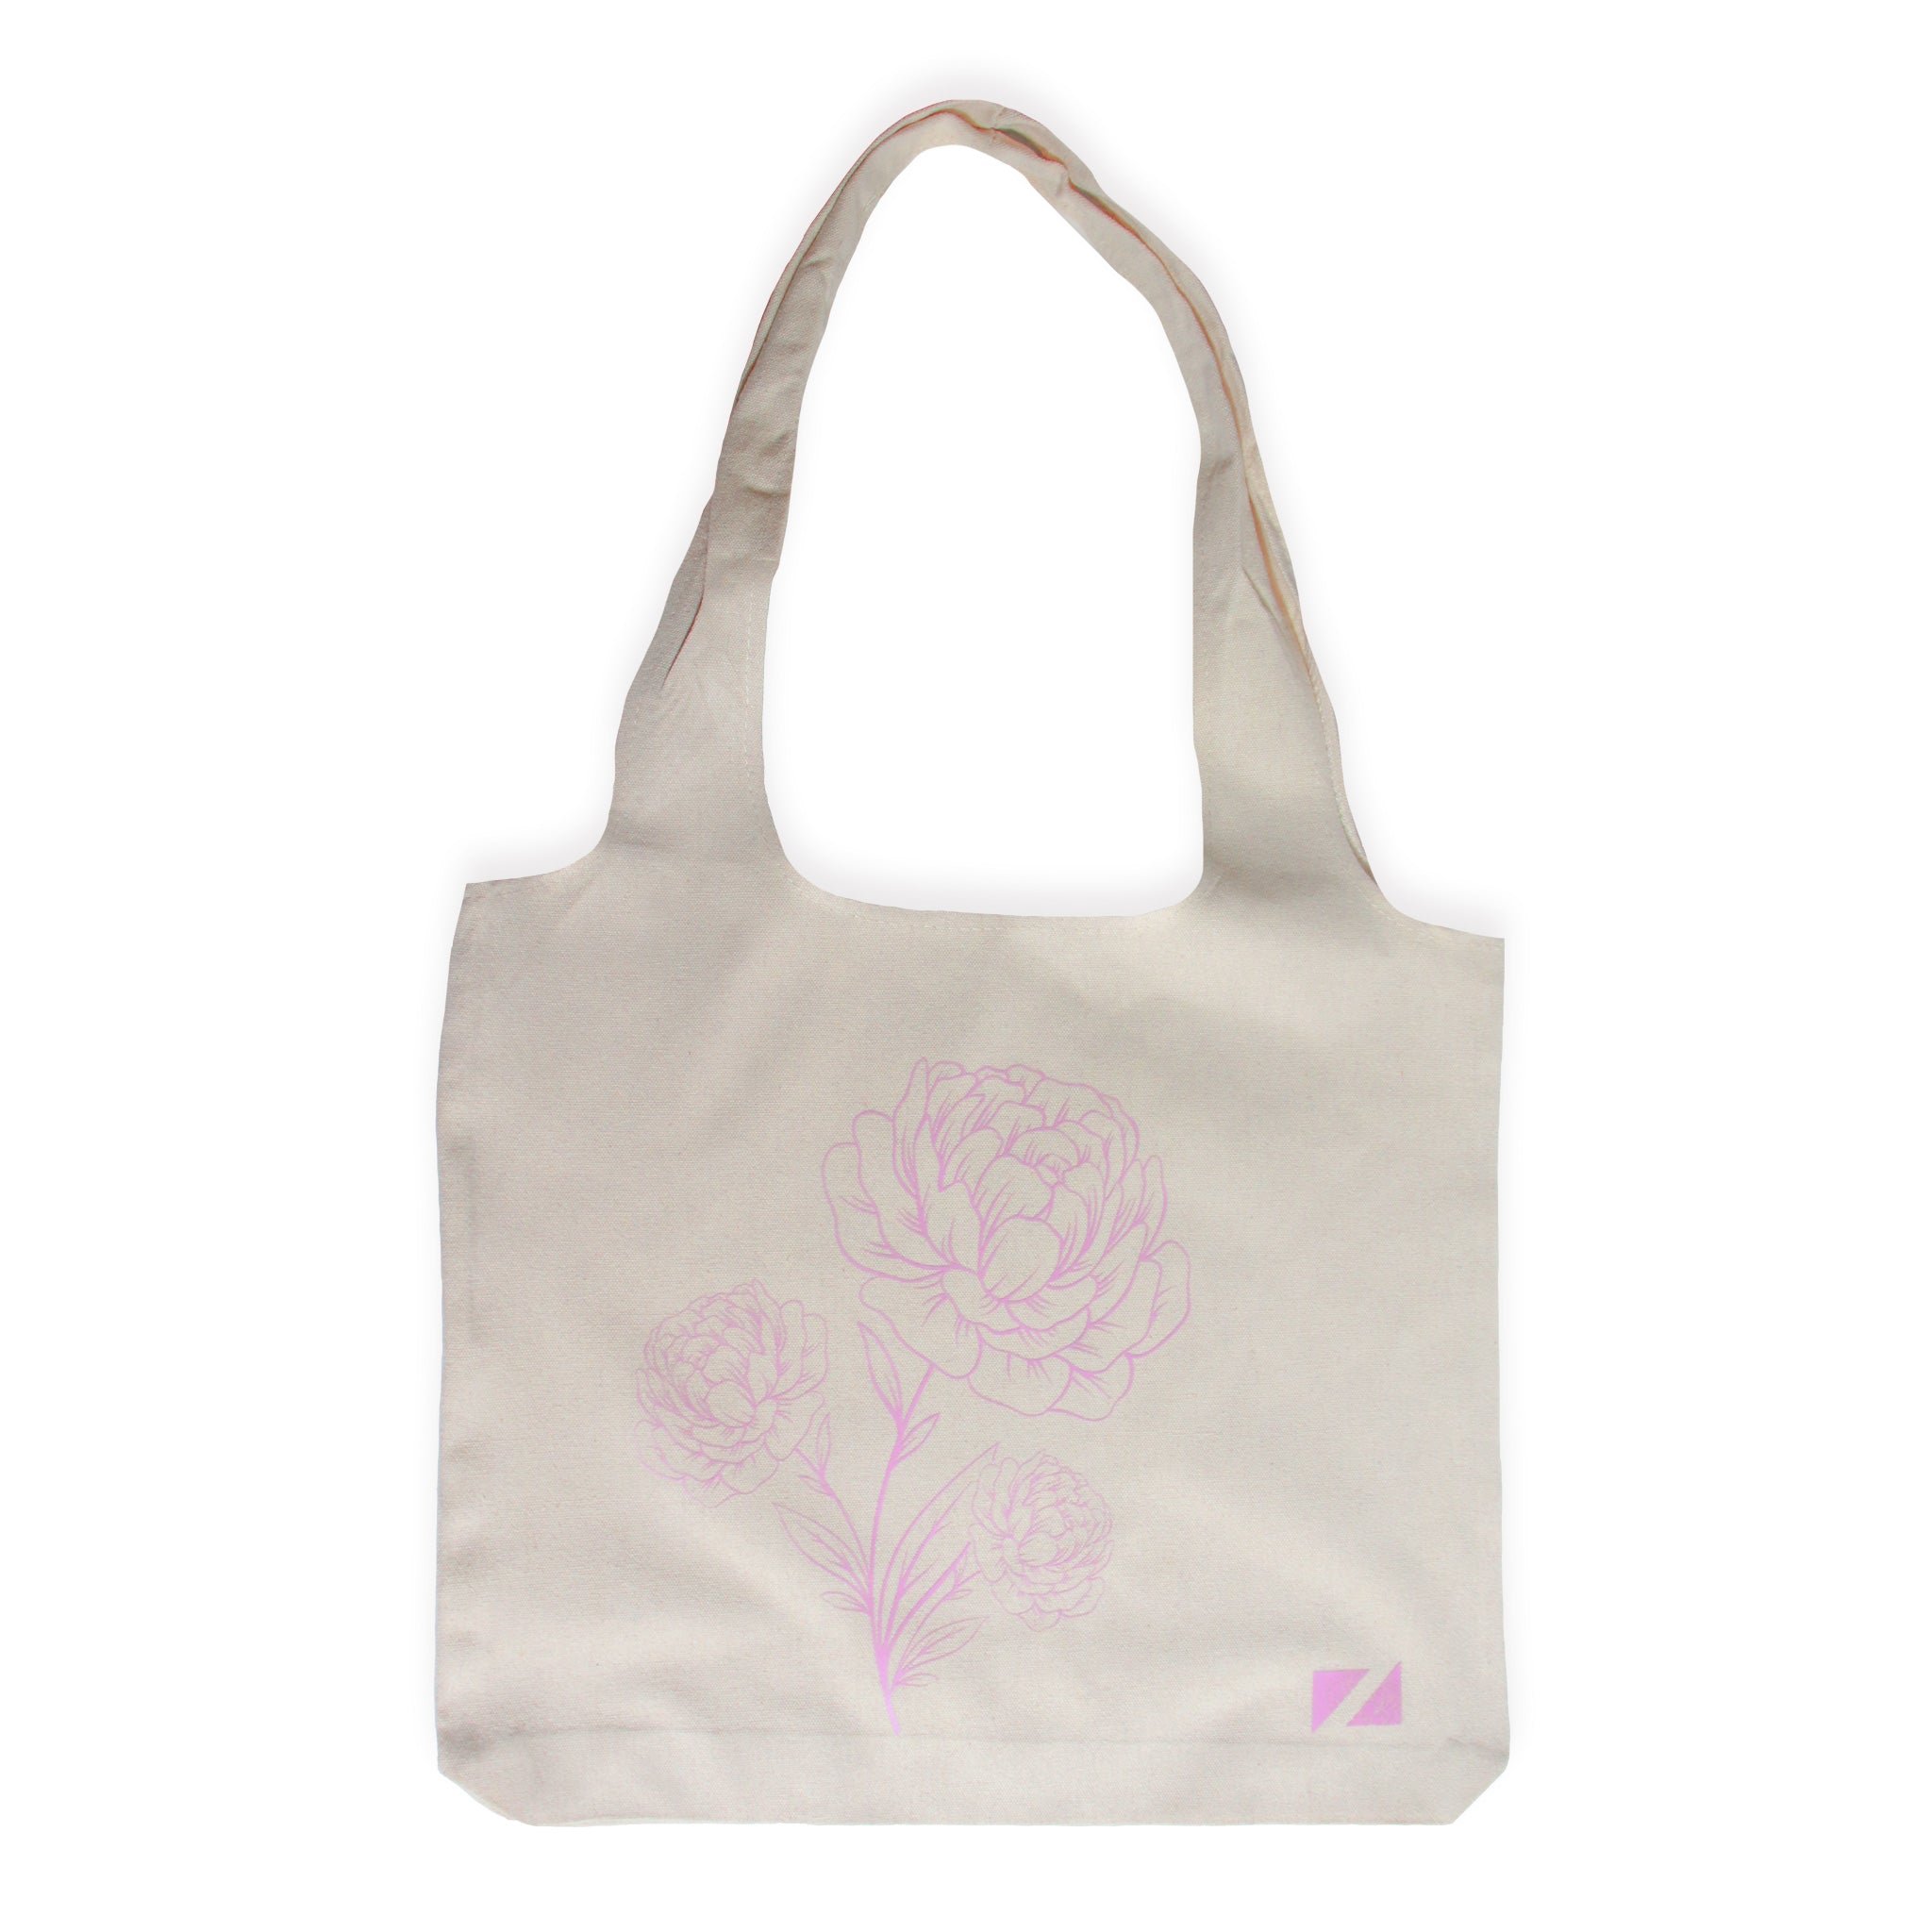 The Carnation Tote